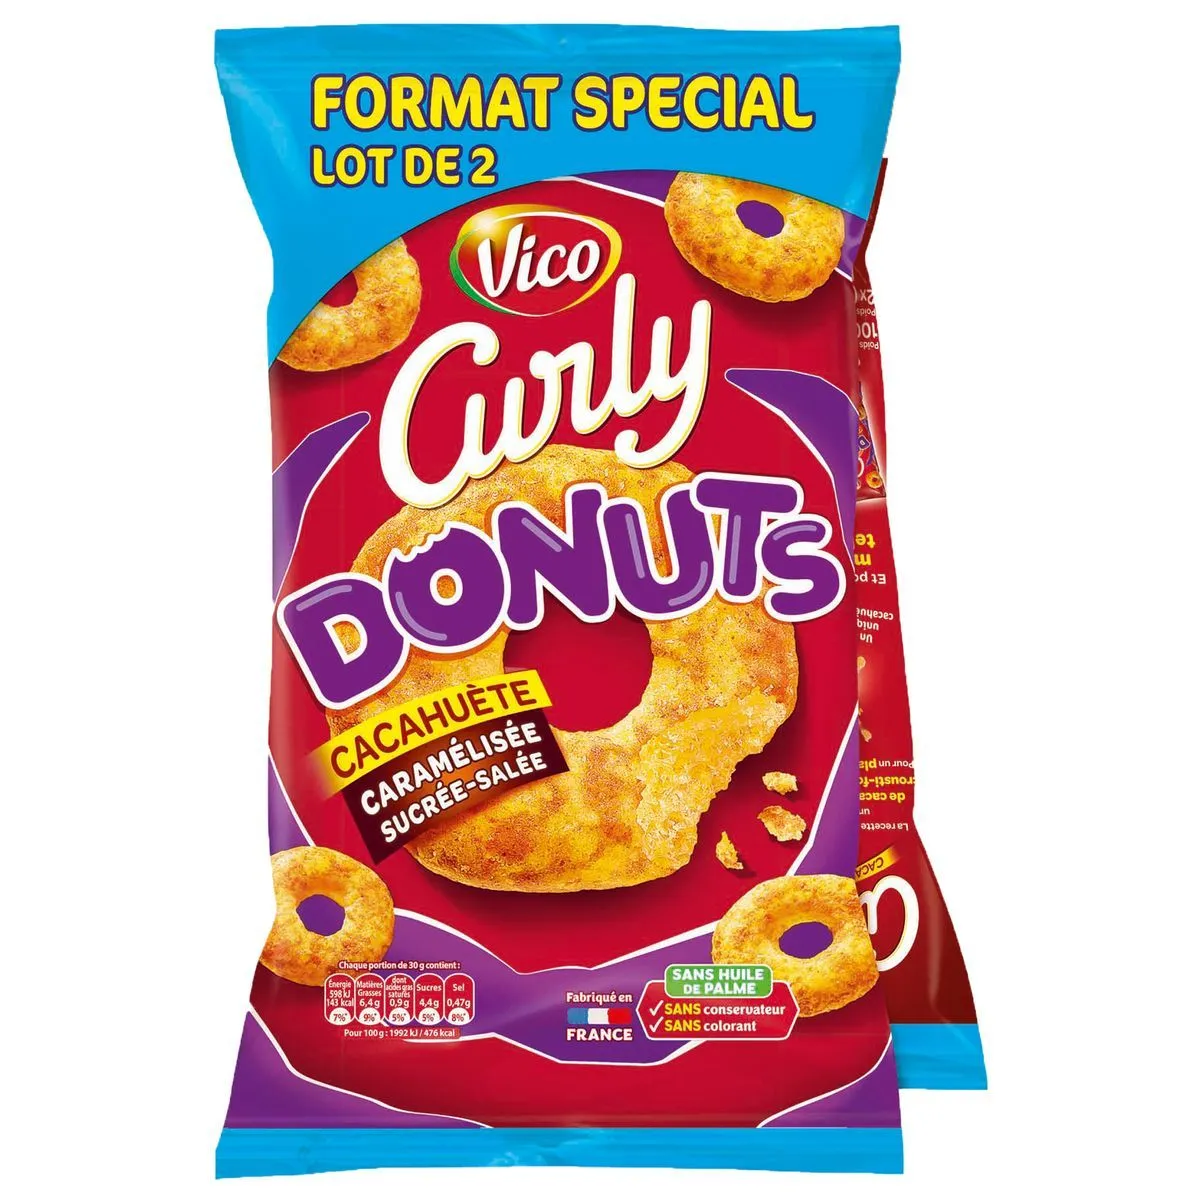 curly donut's cacahuète vico